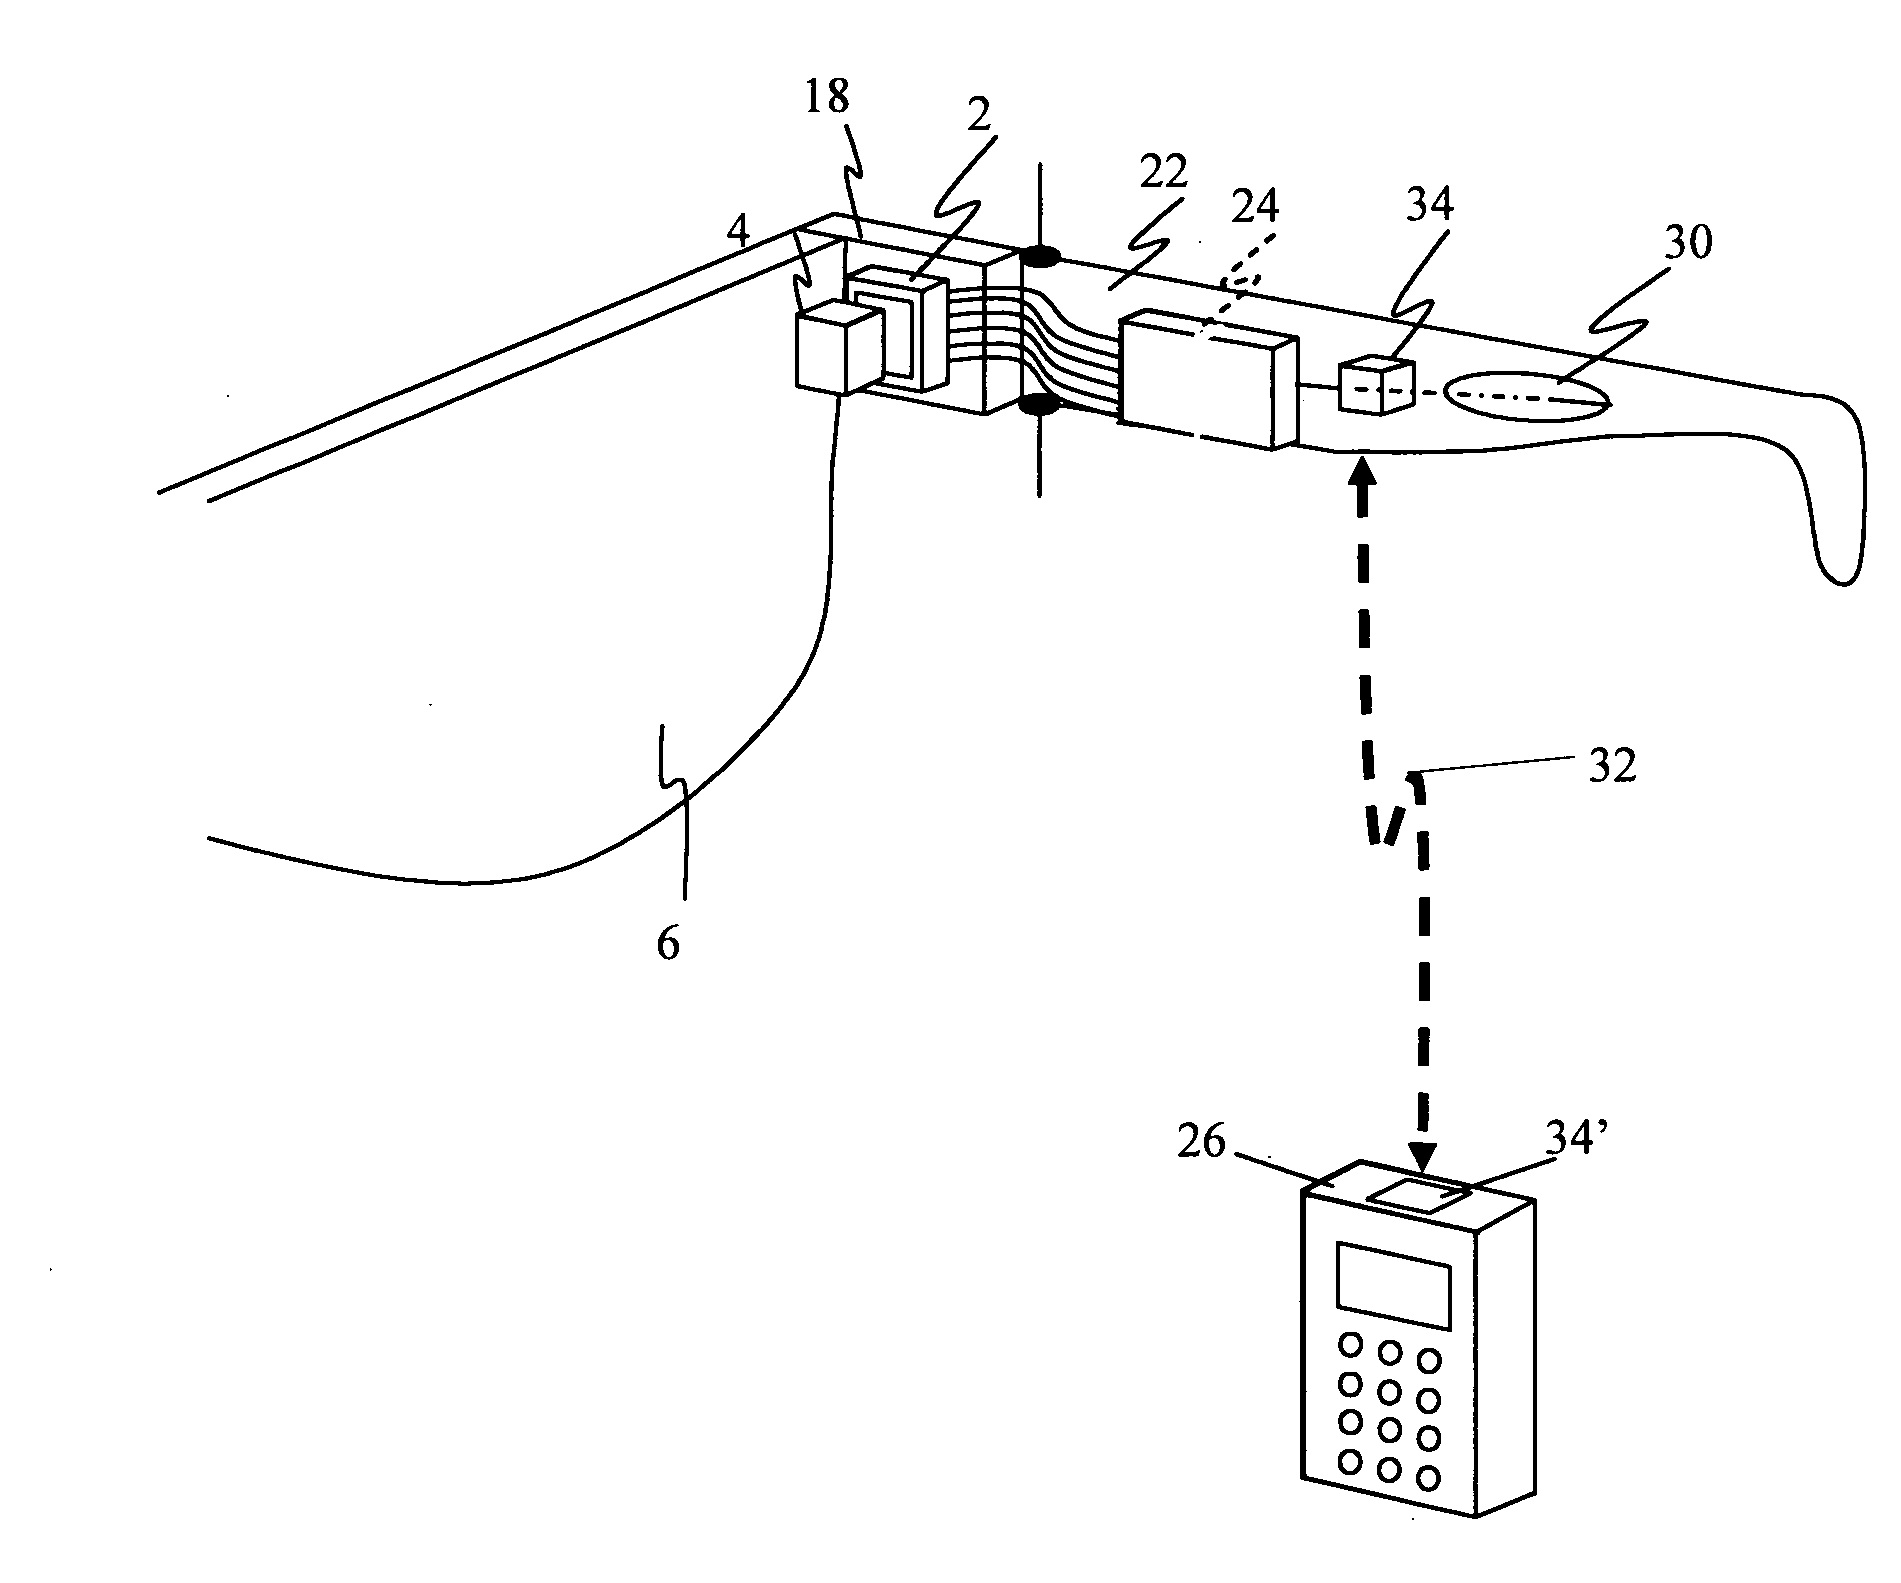 Distributed head-mounted display system